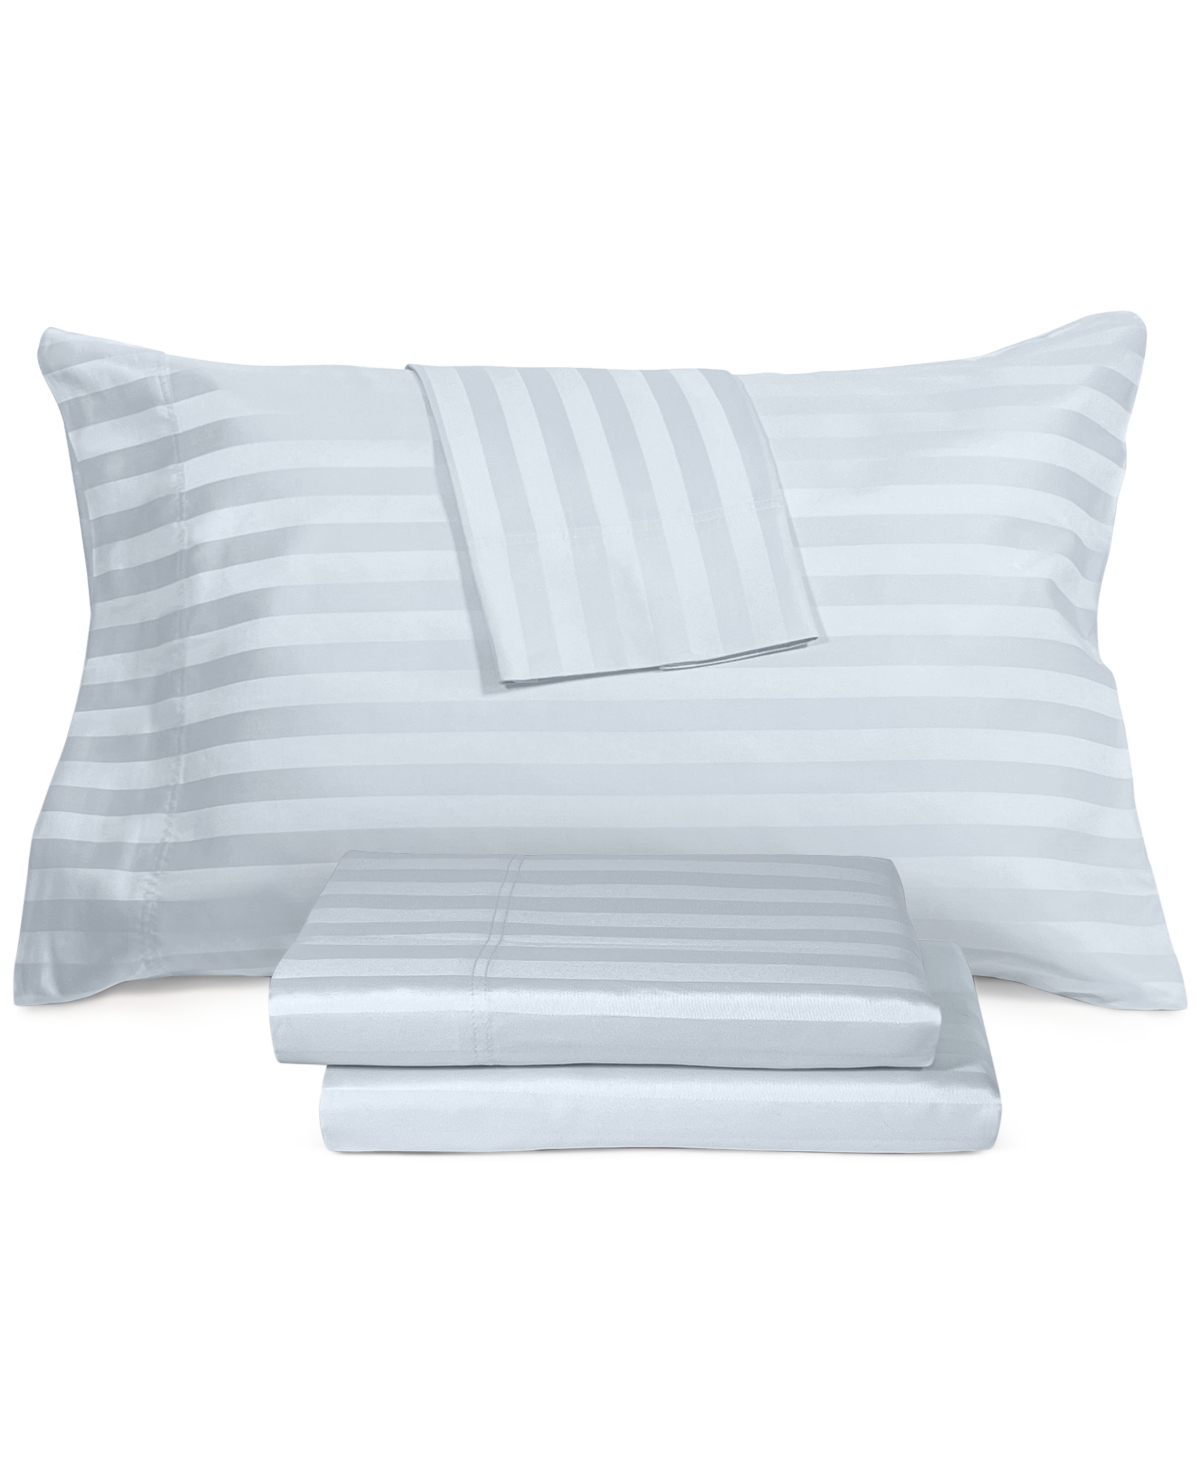 Aq Textiles Ultra Lux Wide Stripe 1200-thread Count 4-pc. Sheet Set, King Bedding In Blue